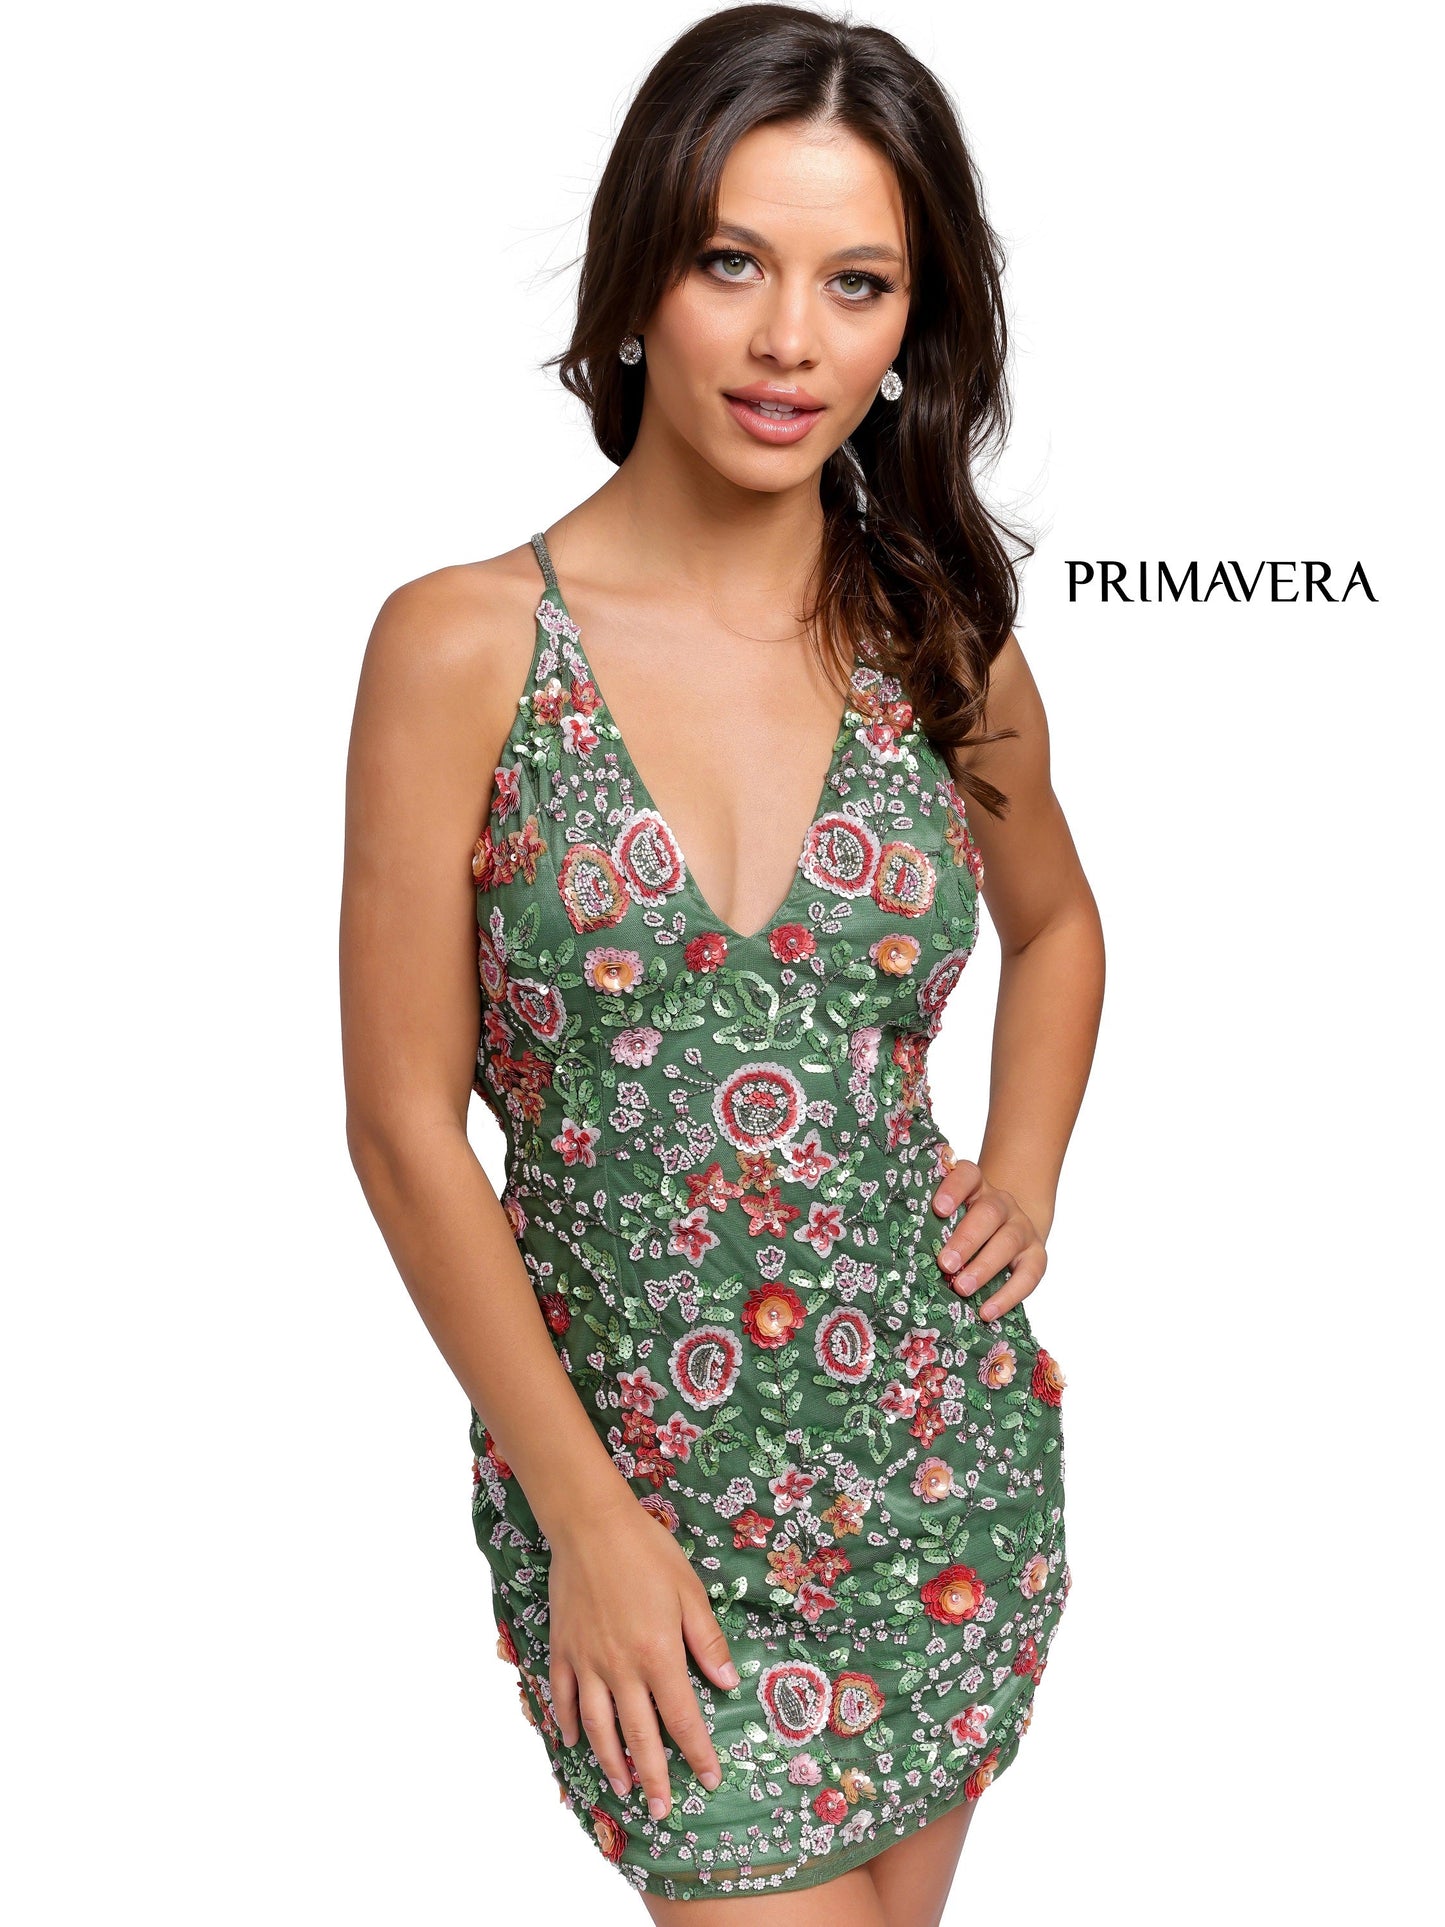 This Primavera Couture 1938 dress is sure to make a statement! Featuring a beaded sequin pattern and v-neckline with spaghetti straps, this elegant cocktail dress is perfect for any homecoming or prom event. Sage Green Front